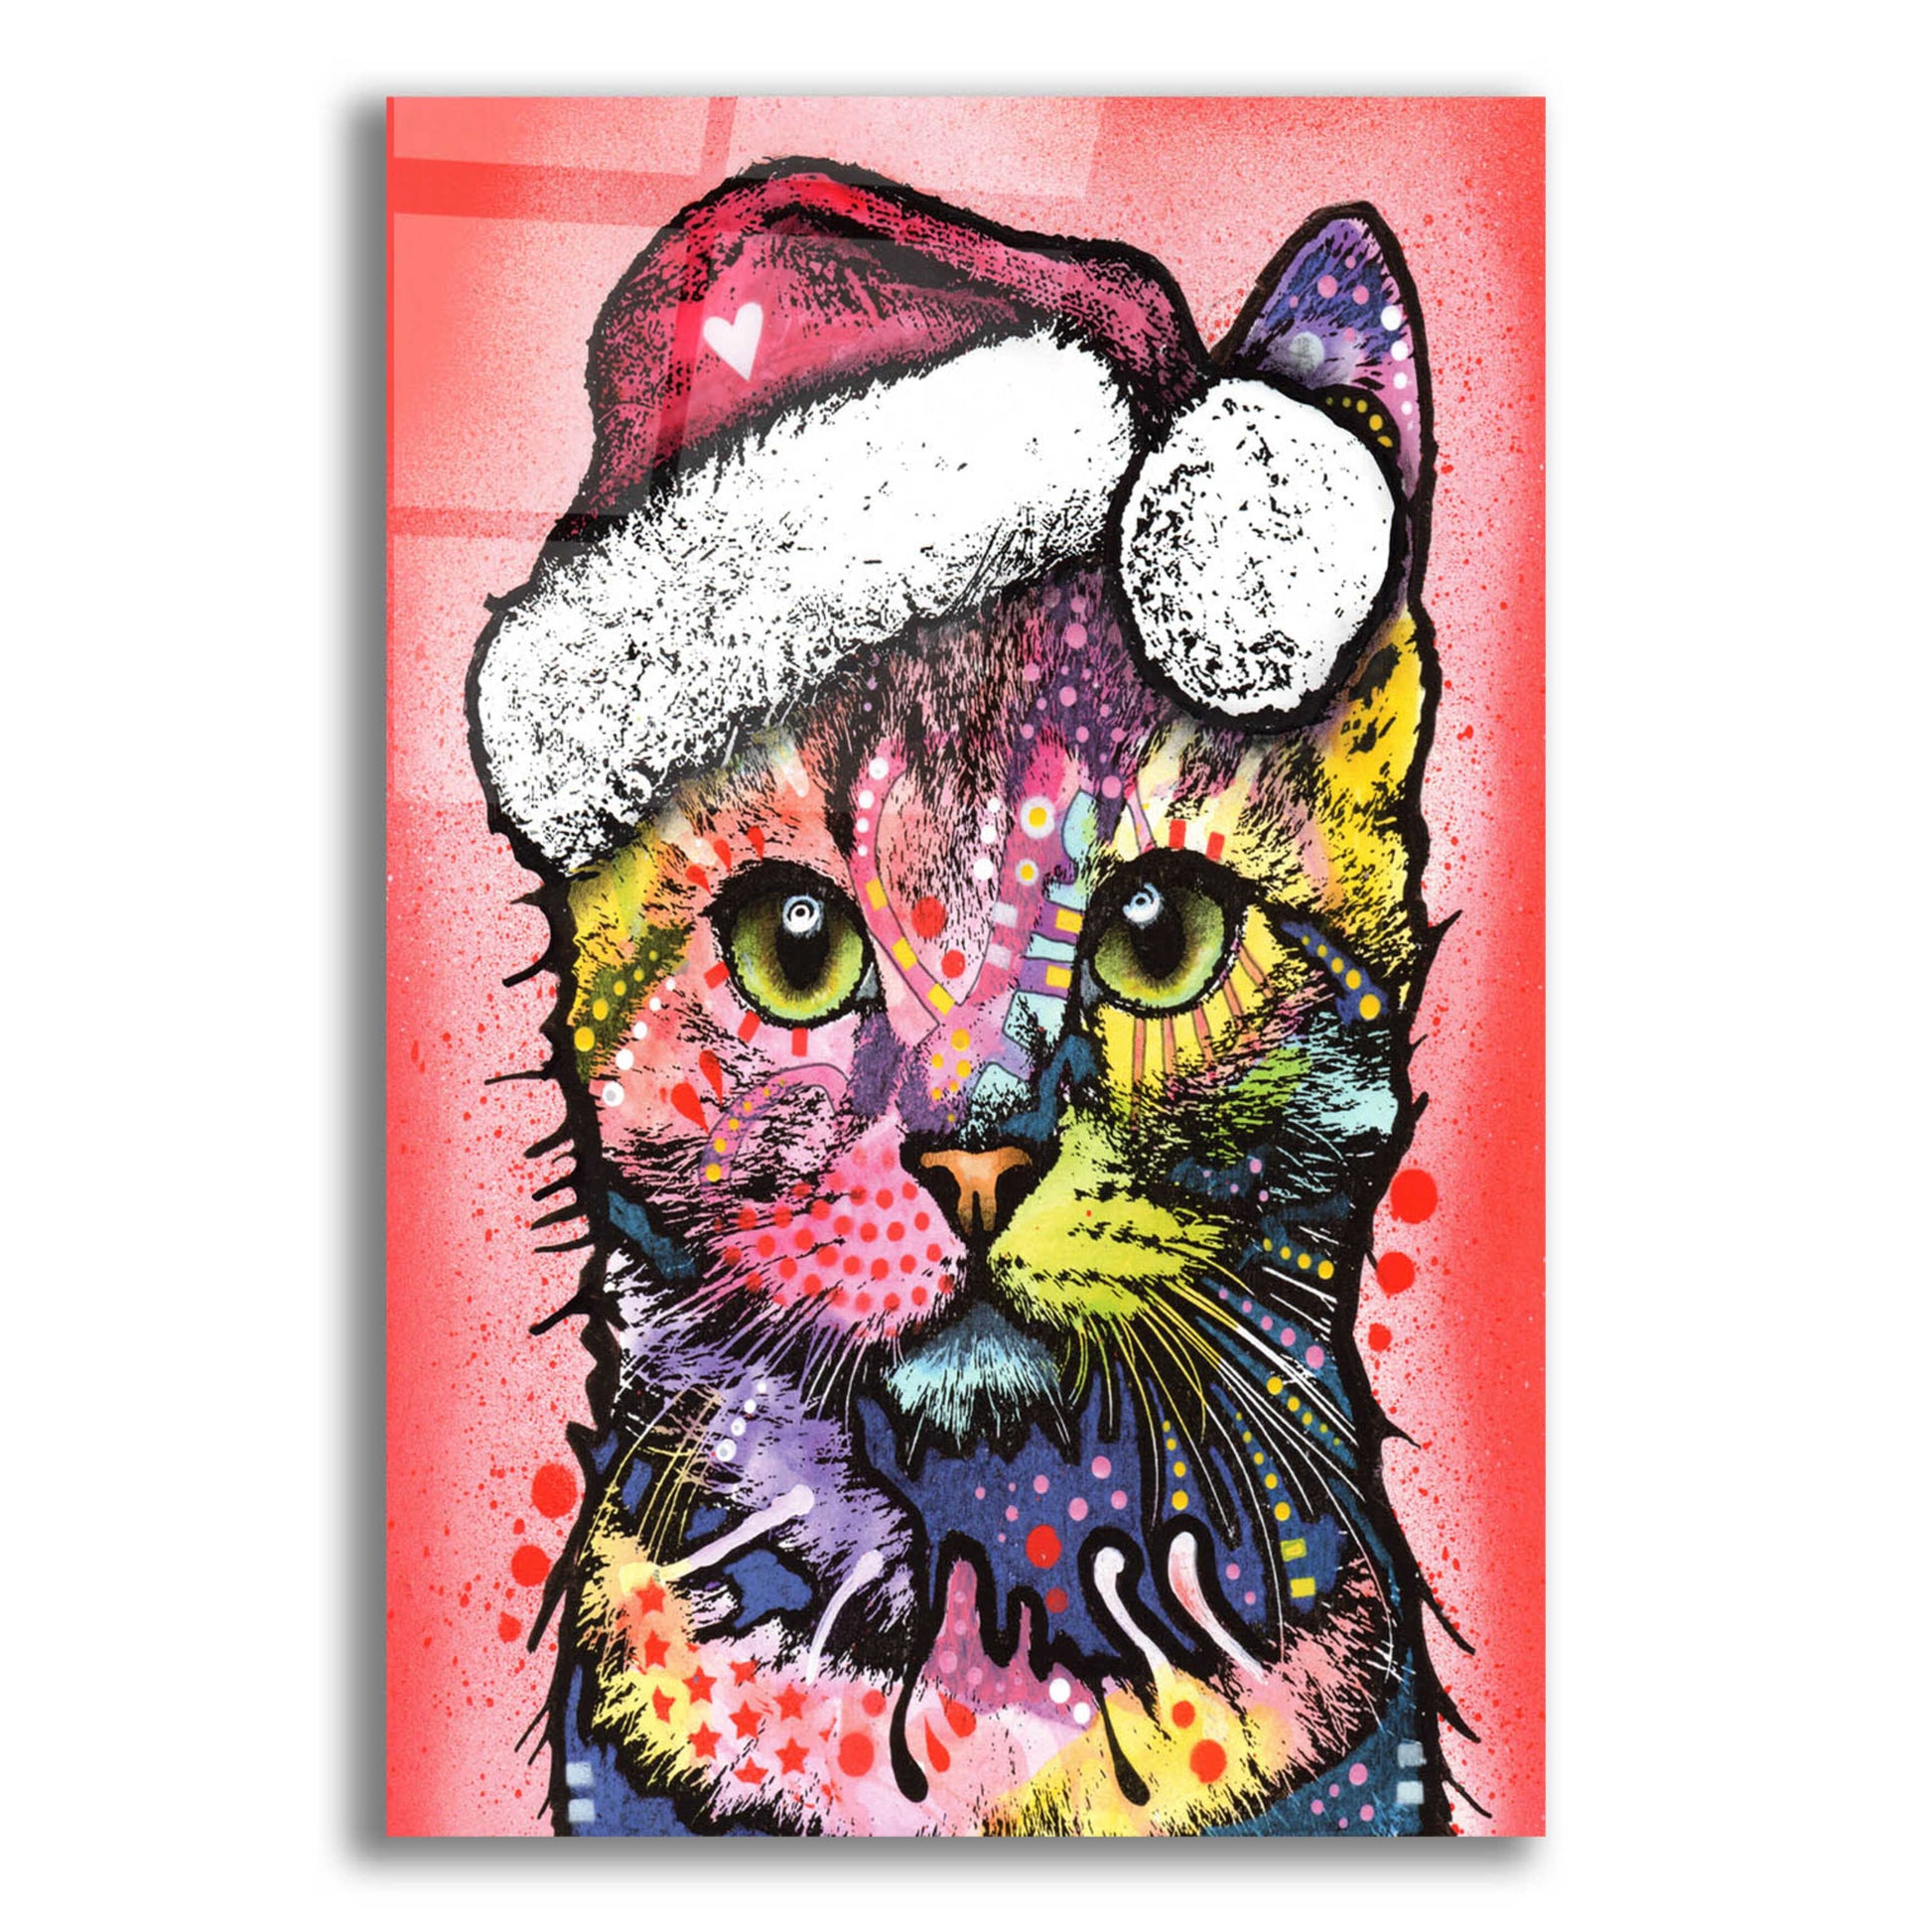 Epic Art 'Christmas Cat' by Dean Russo, Acrylic Glass Wall Art,12x16